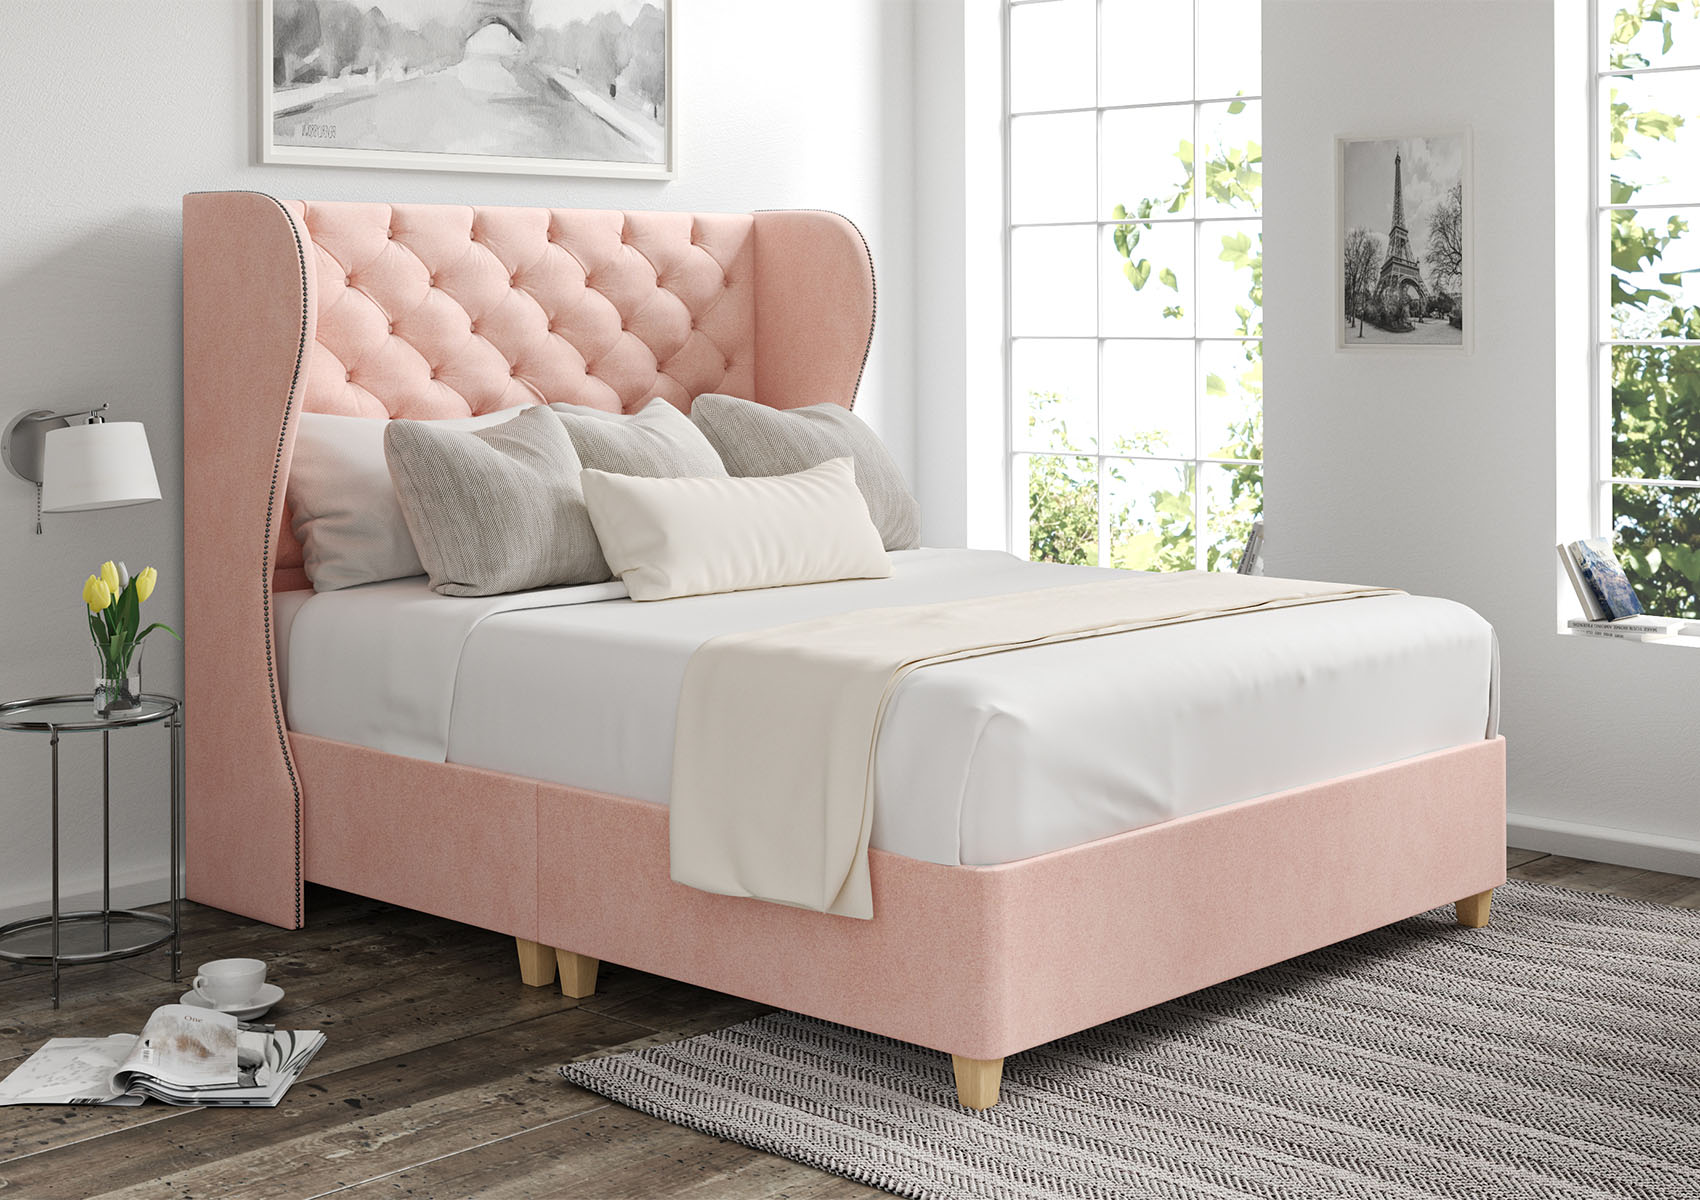 View Miami Arlington Candyfloss Upholstered Single Winged Bed Time4Sleep information